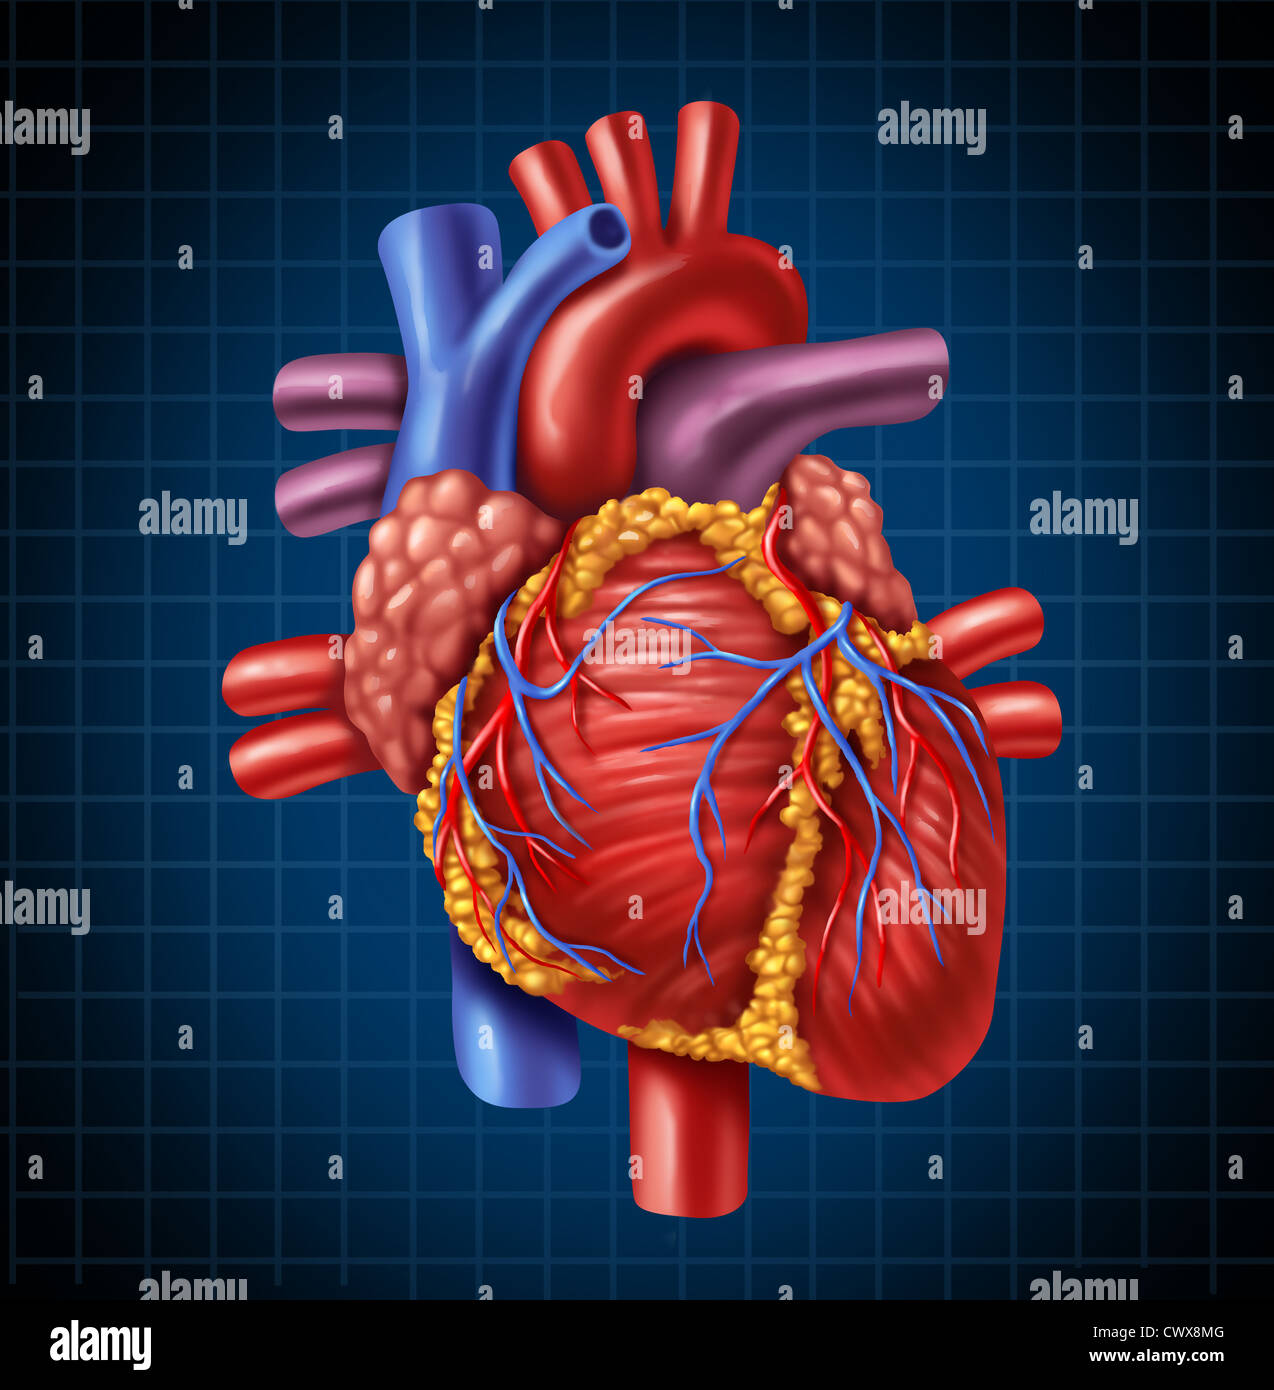 Human heart anatomy from a healthy body on a blue and black graph background as a medical health care symbol of an inner cardiovascular organ. Stock Photo